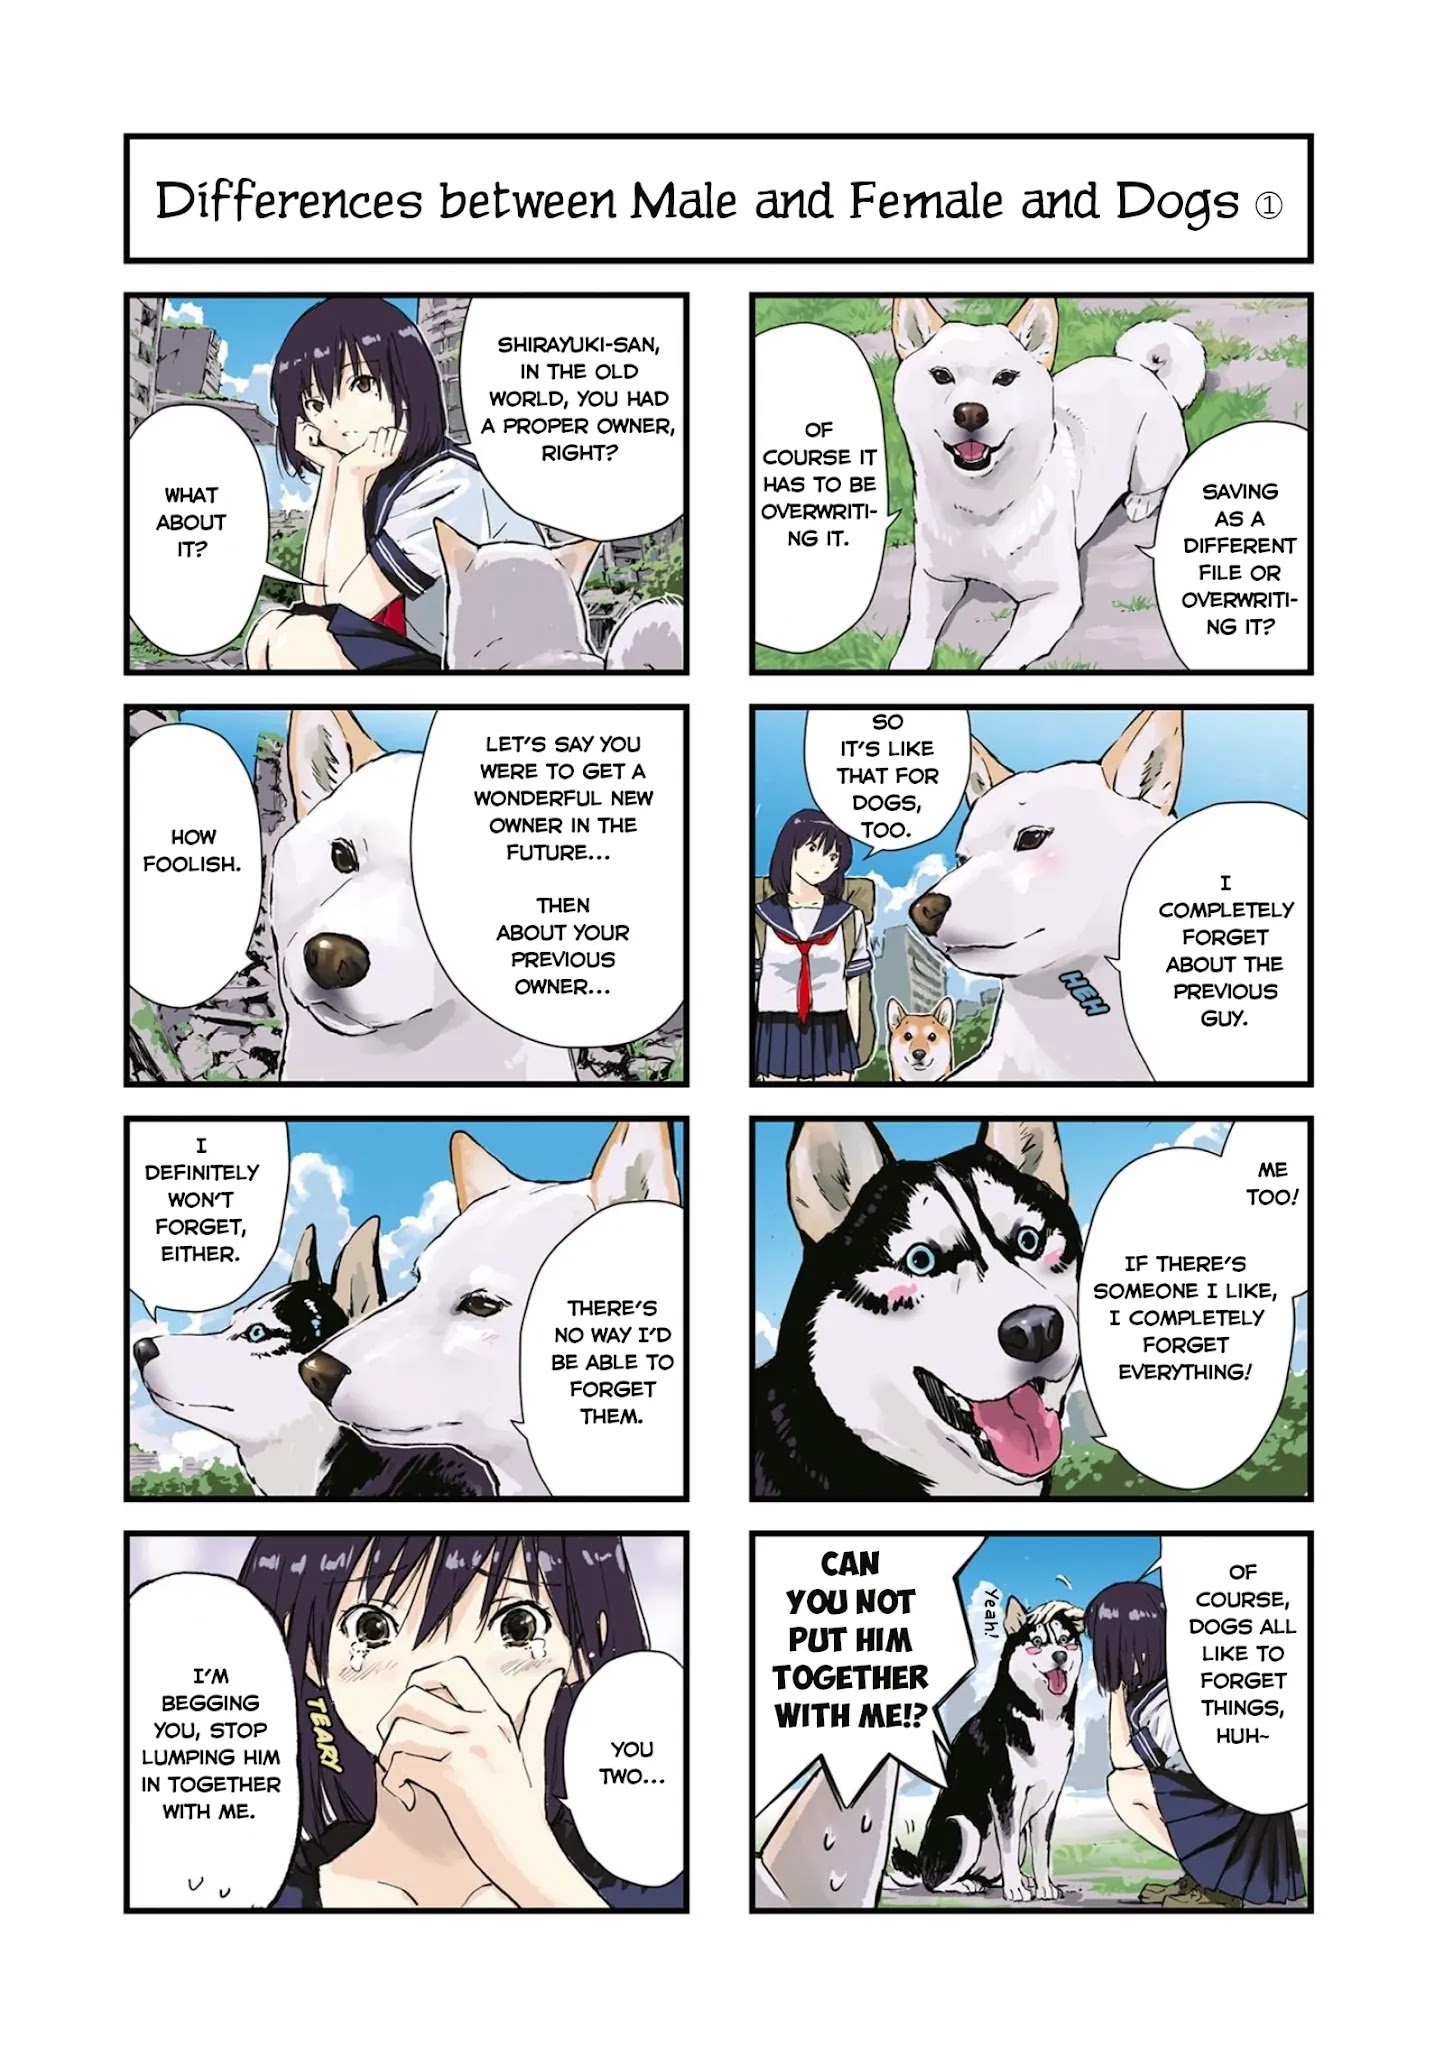 Roaming The Apocalypse With My Shiba Inu - chapter 33 - #2